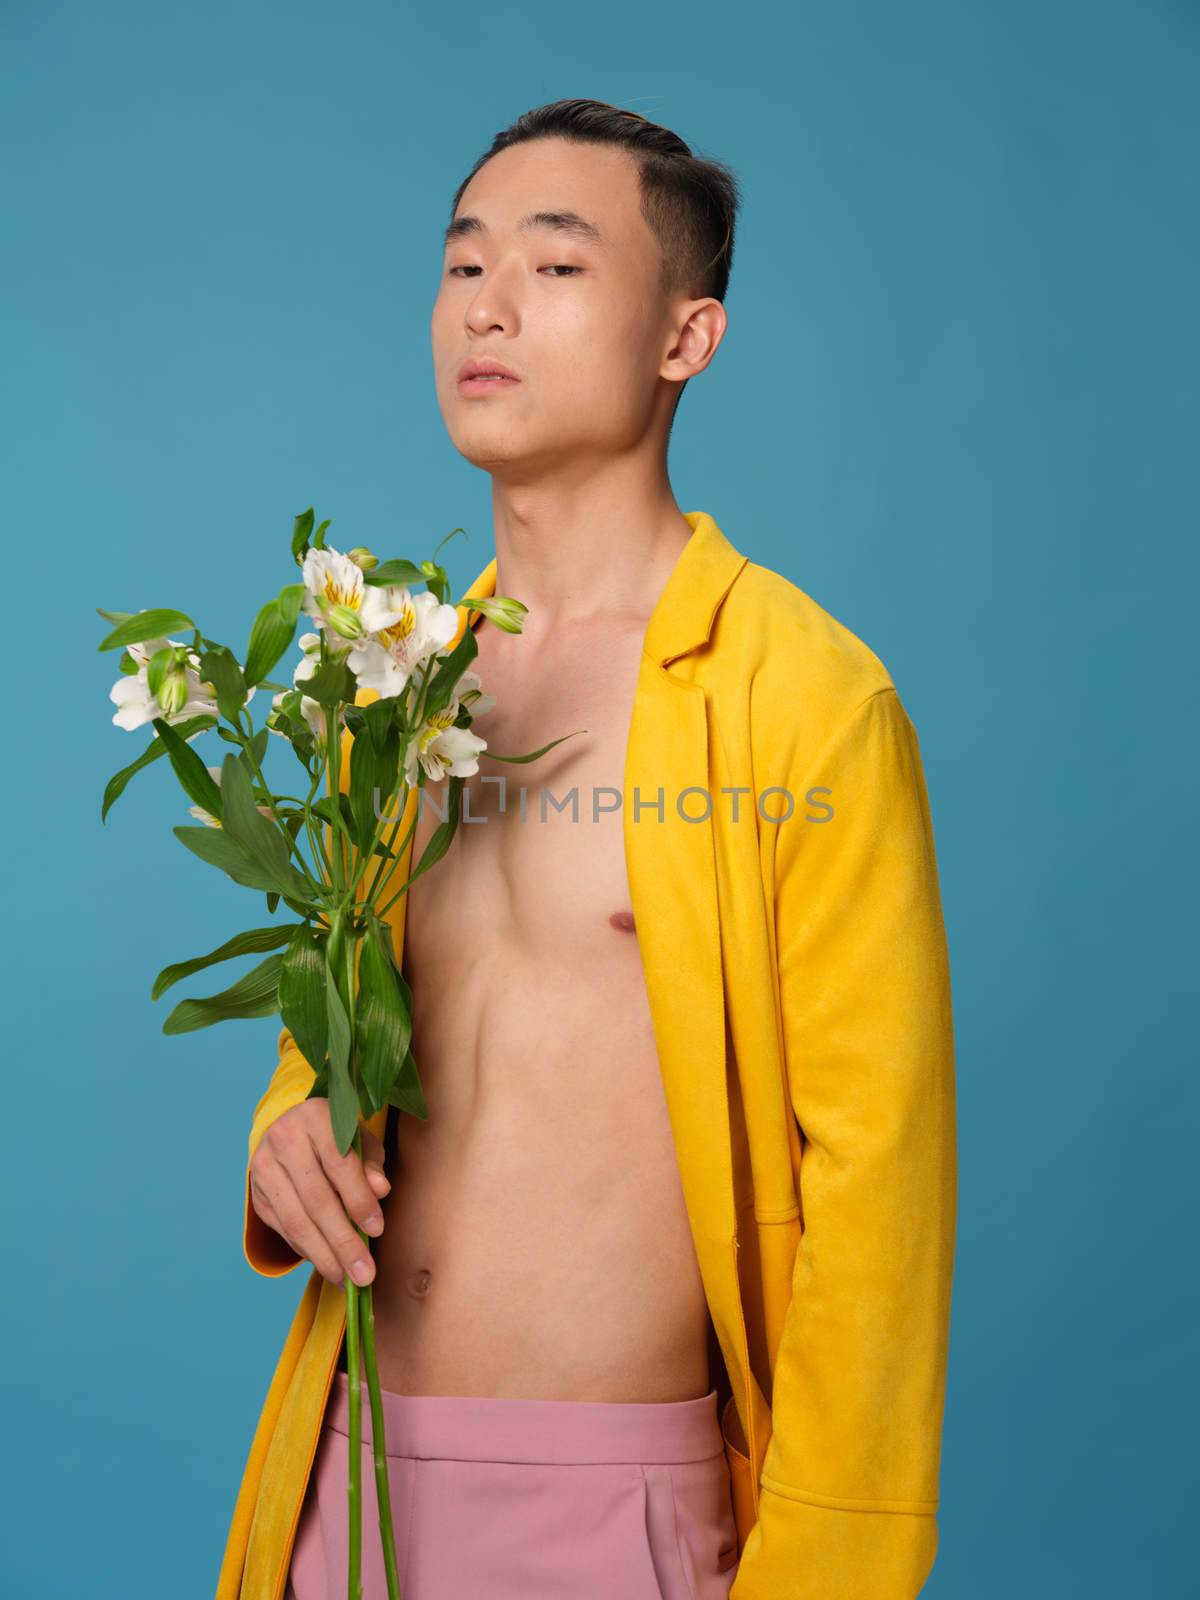 Sexy man in an unbuttoned coat and a bouquet of flowers on a blue background. High quality photo